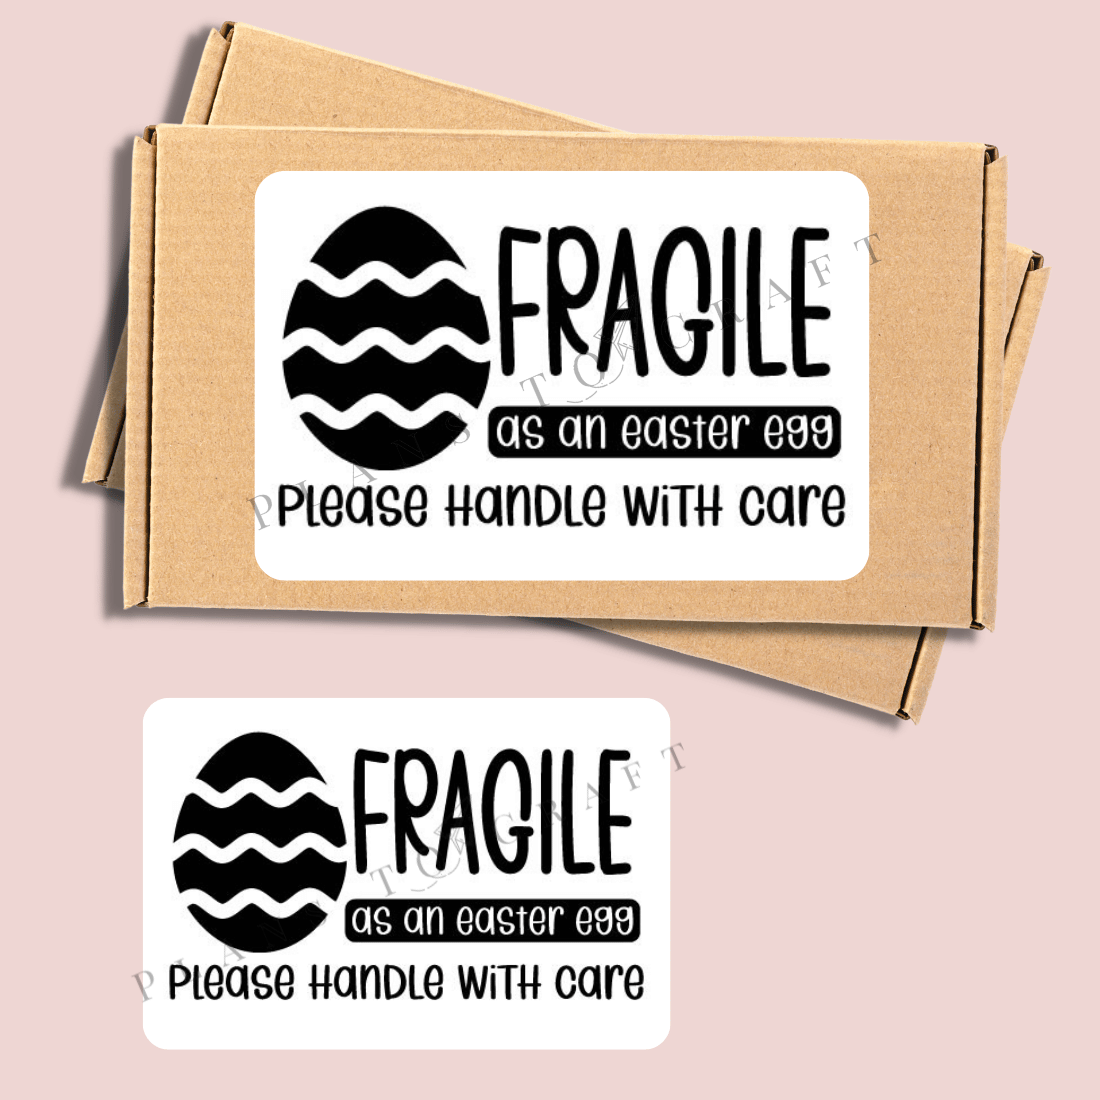 Pair of stickers that say fragile as an easter egg.